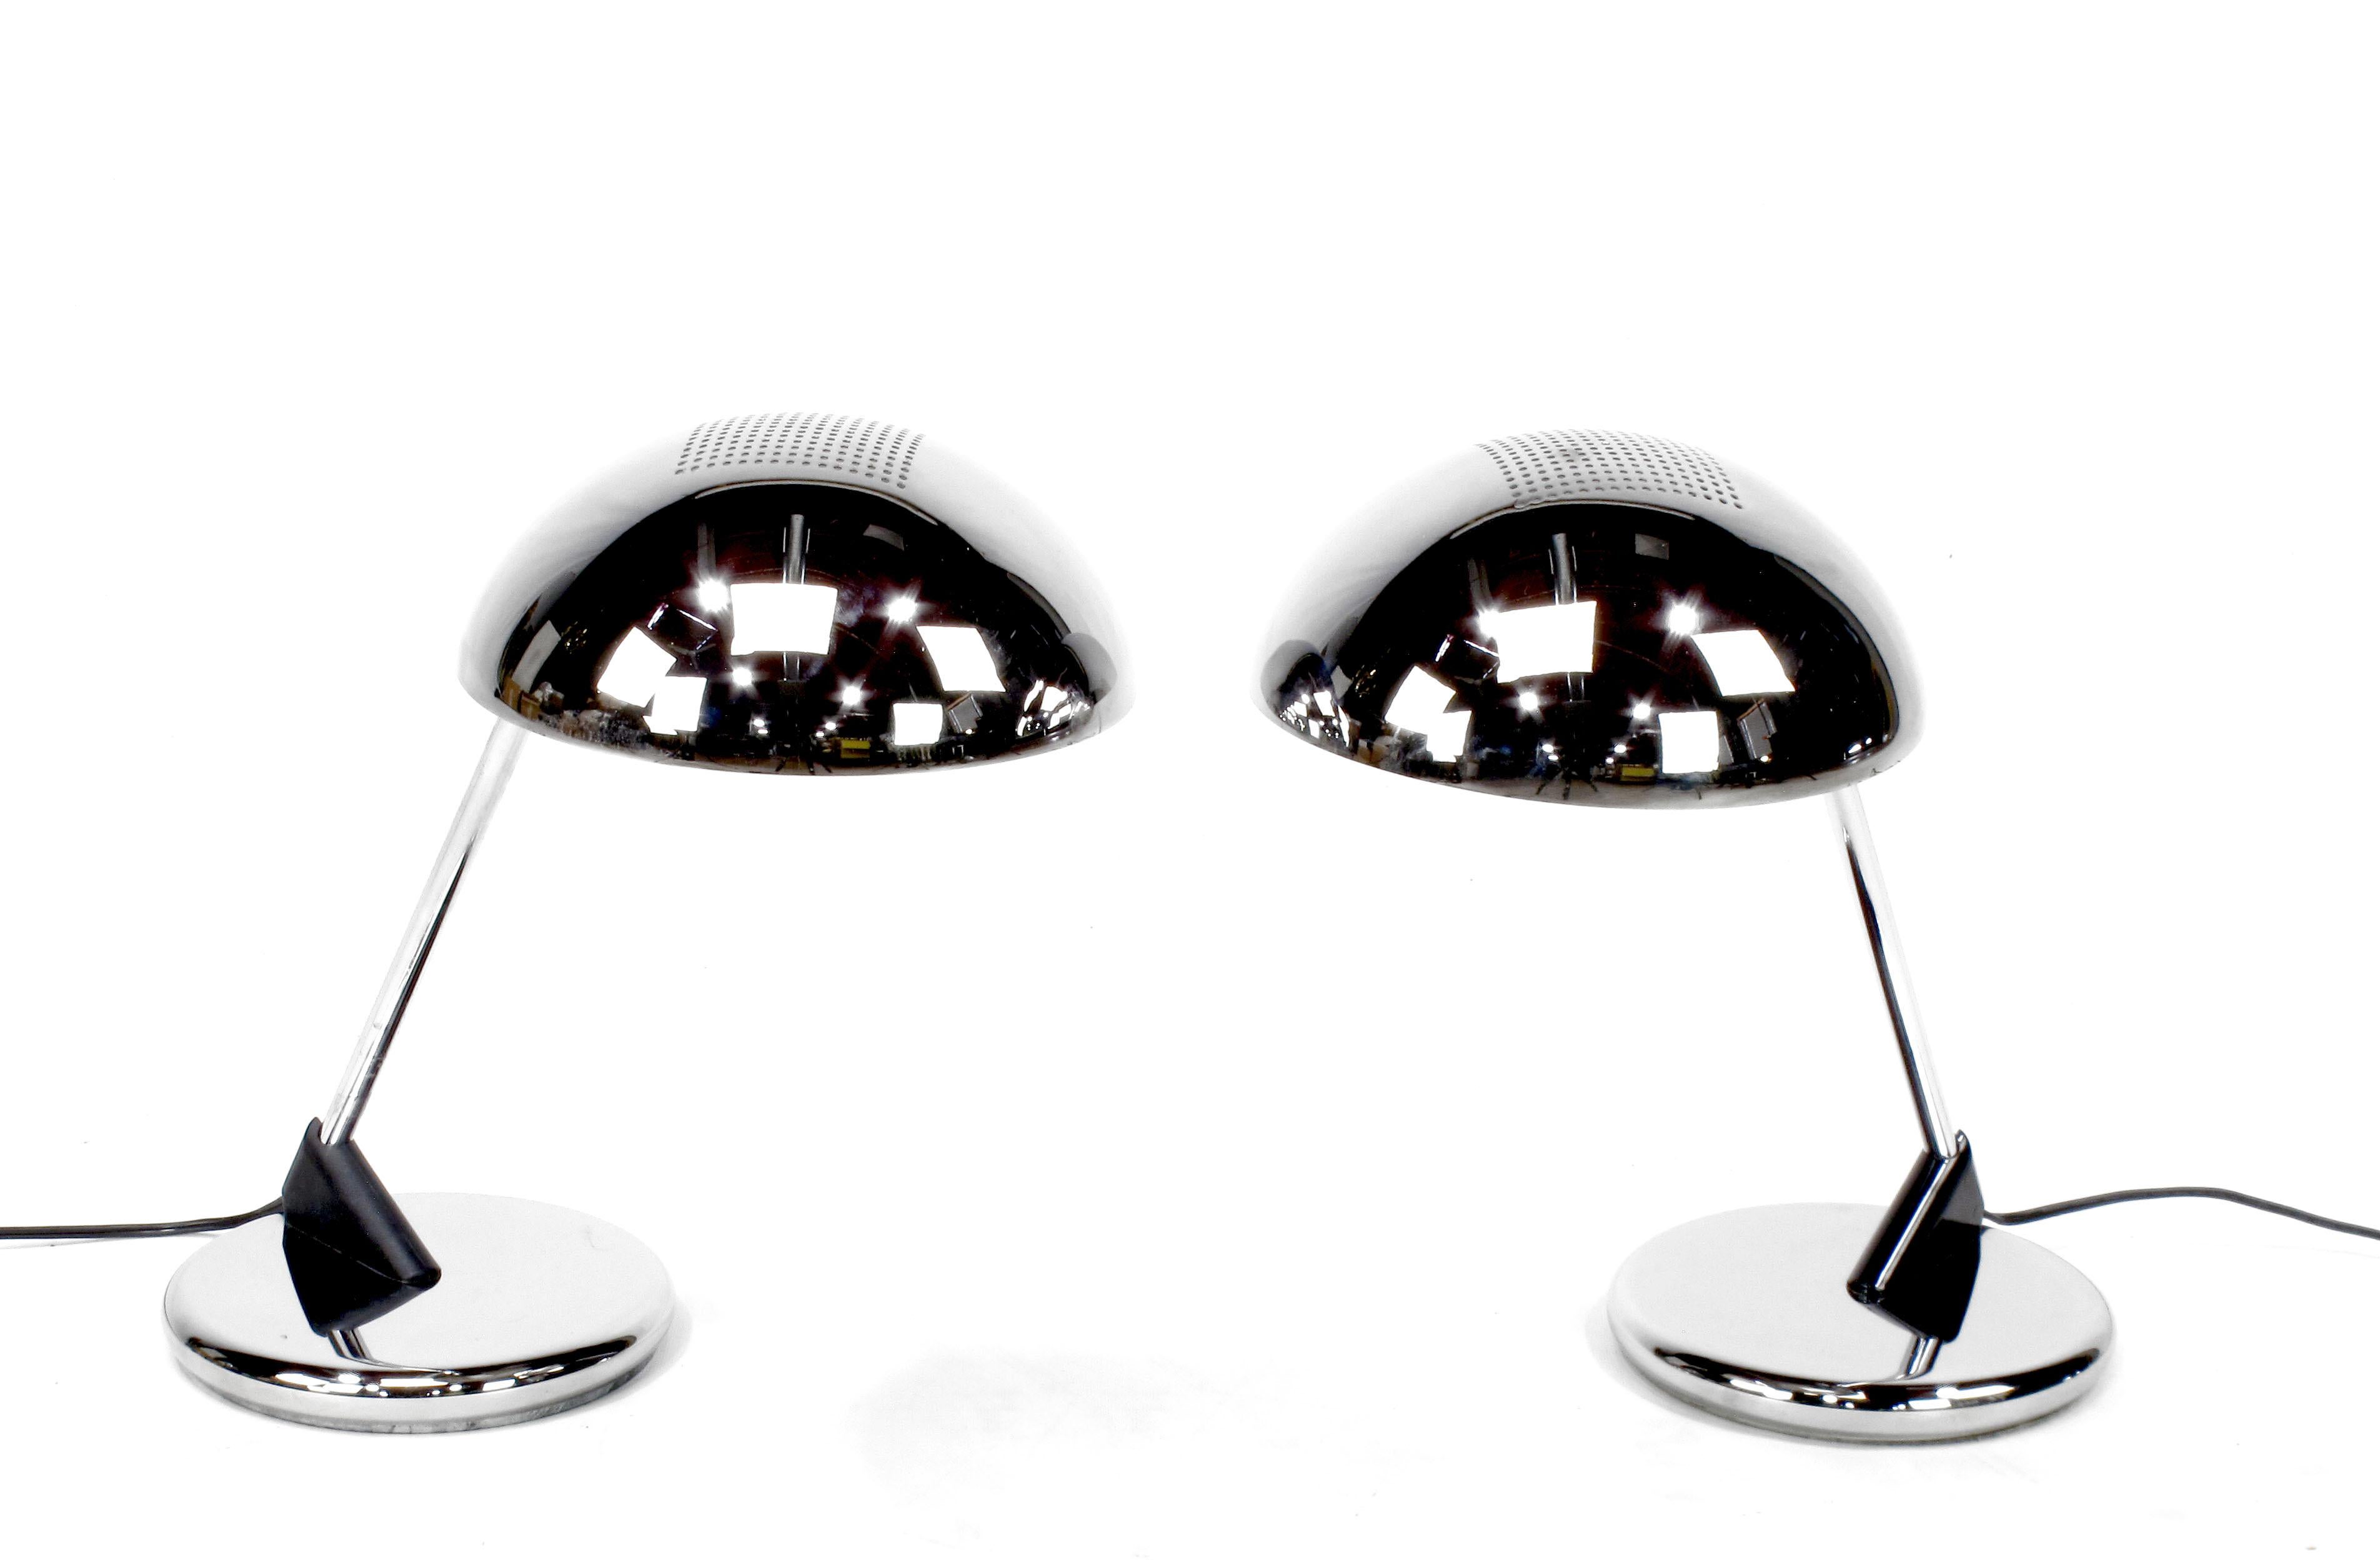 Uncommon pair of chromed steel desk lamps with cantilever dome shade and weighted base, circa 1960s, these are the only pair we have been able to find. They could possibly be Italian or German. Either way they are a fantastic looking pair of desk